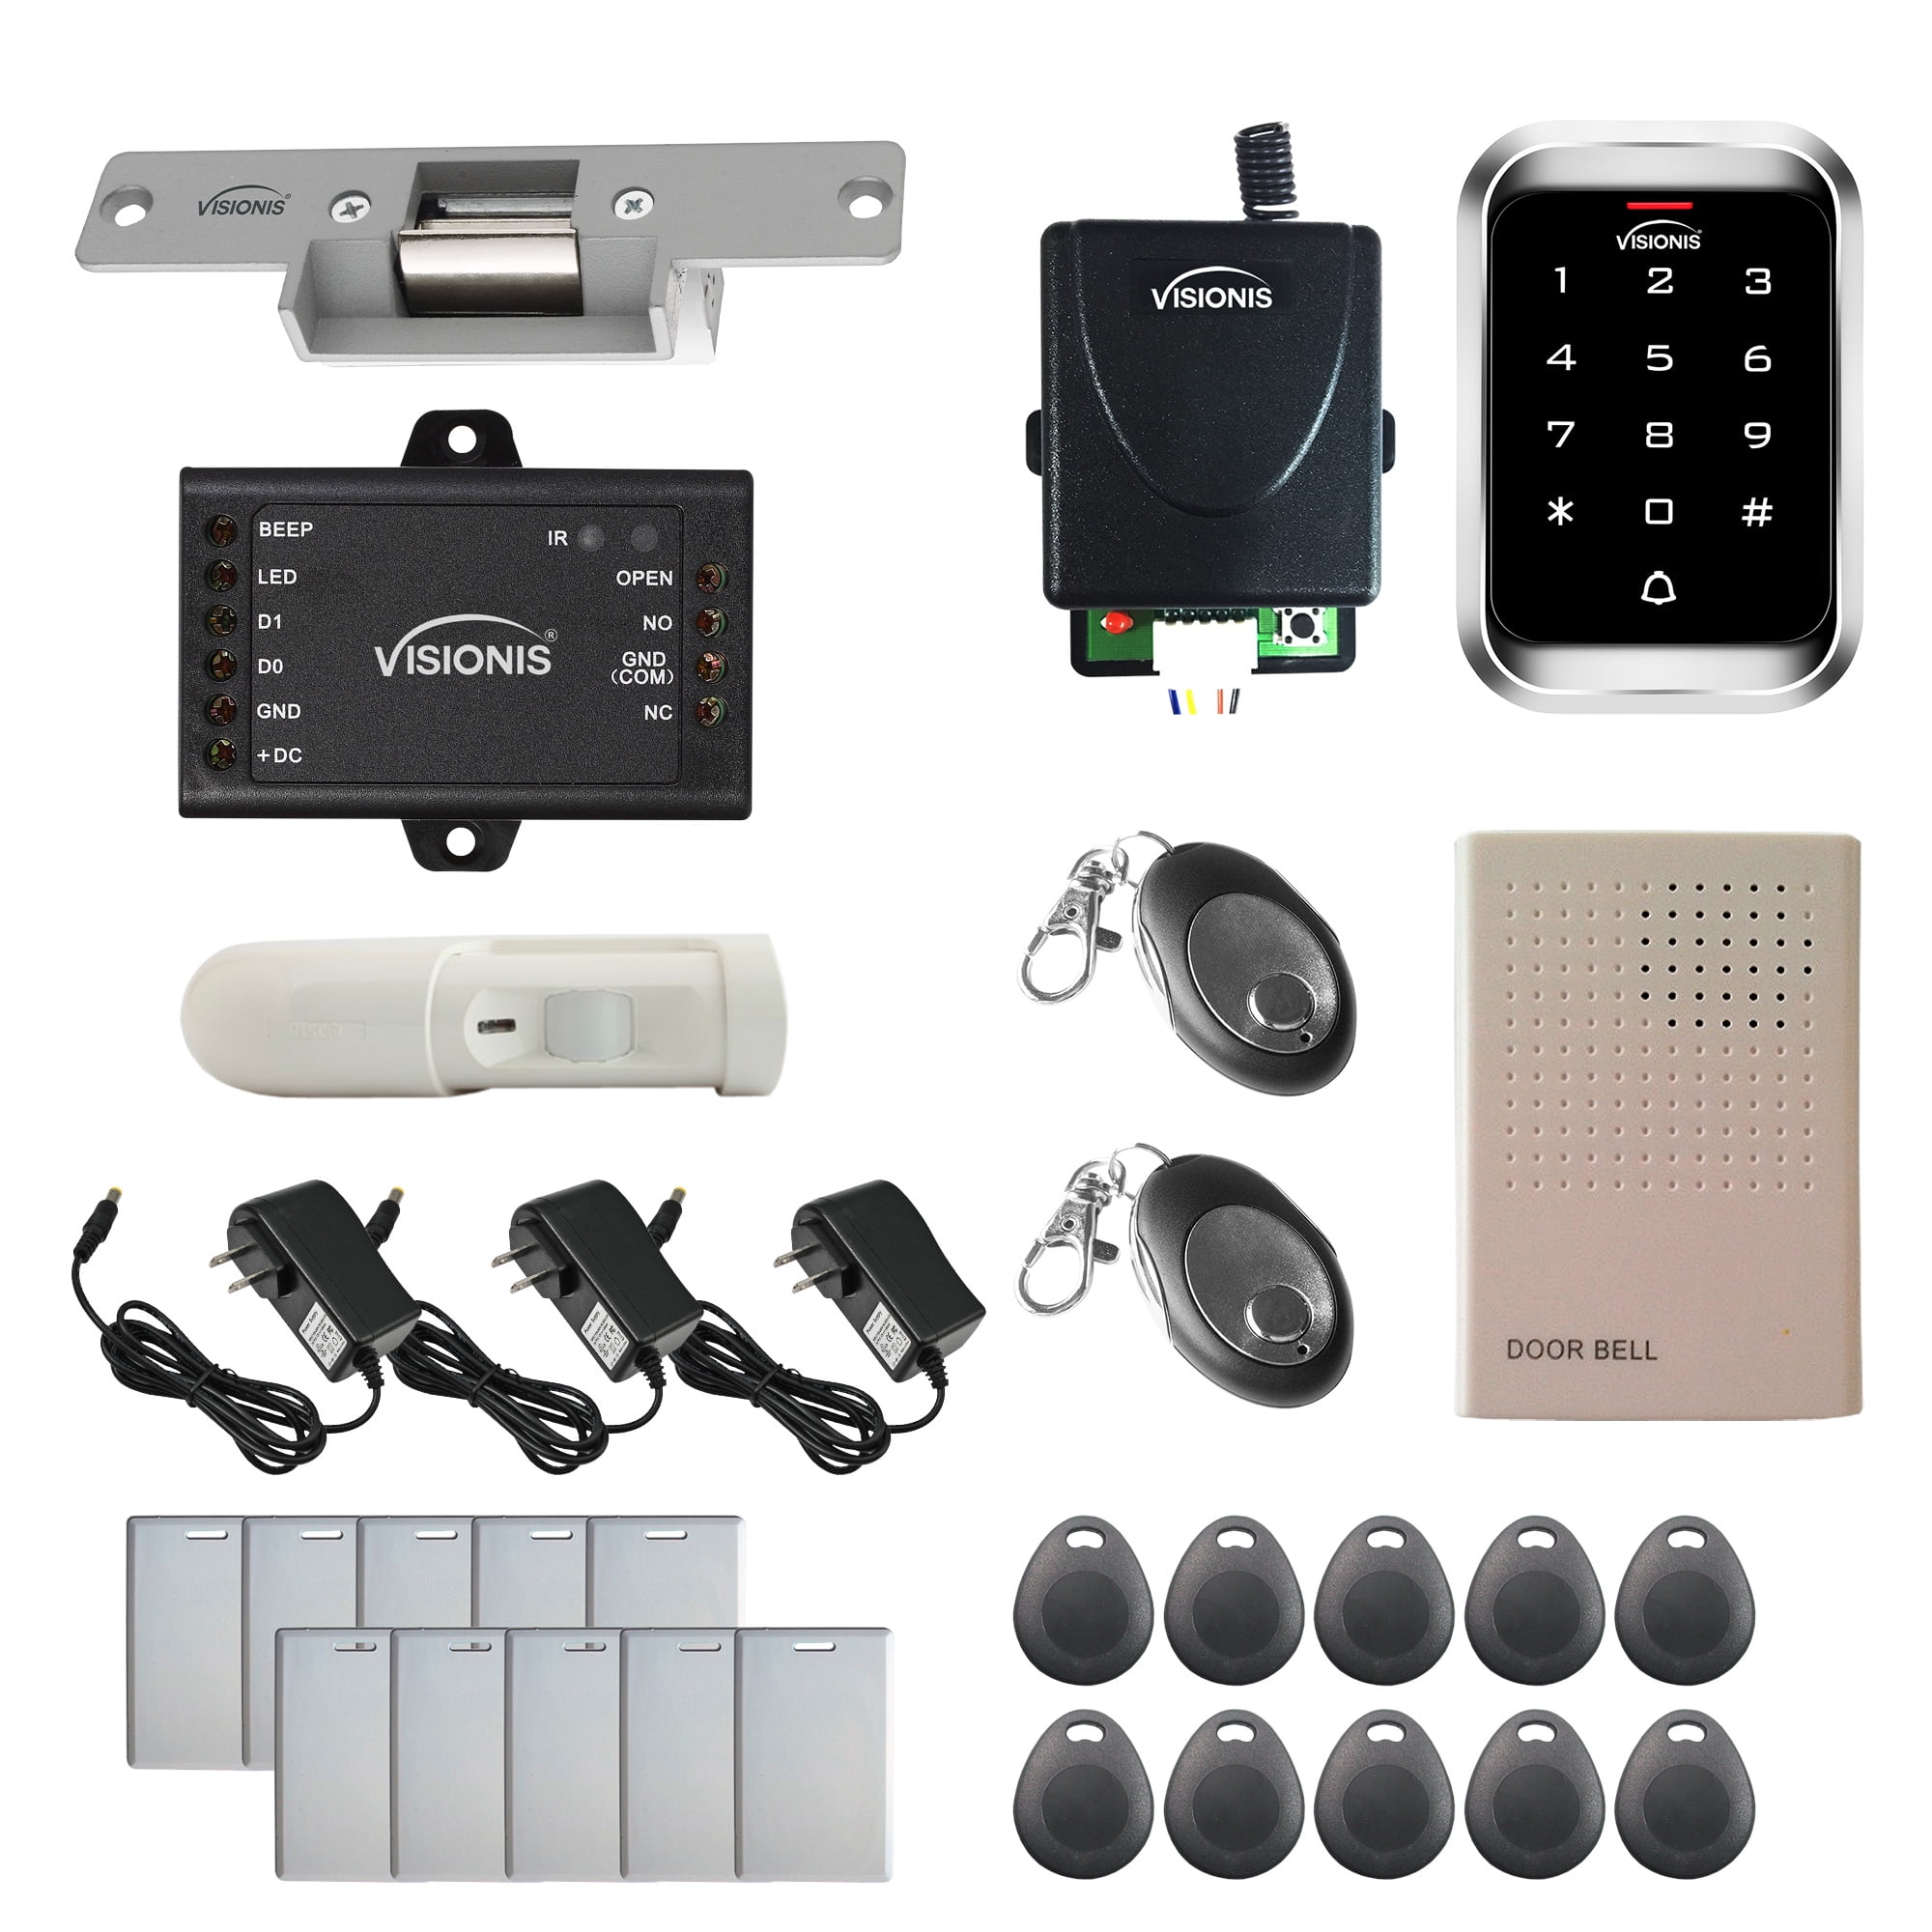 Visionis One Door Access Kit with Outdoor Keypad/Card Reader and Wireless Remote 